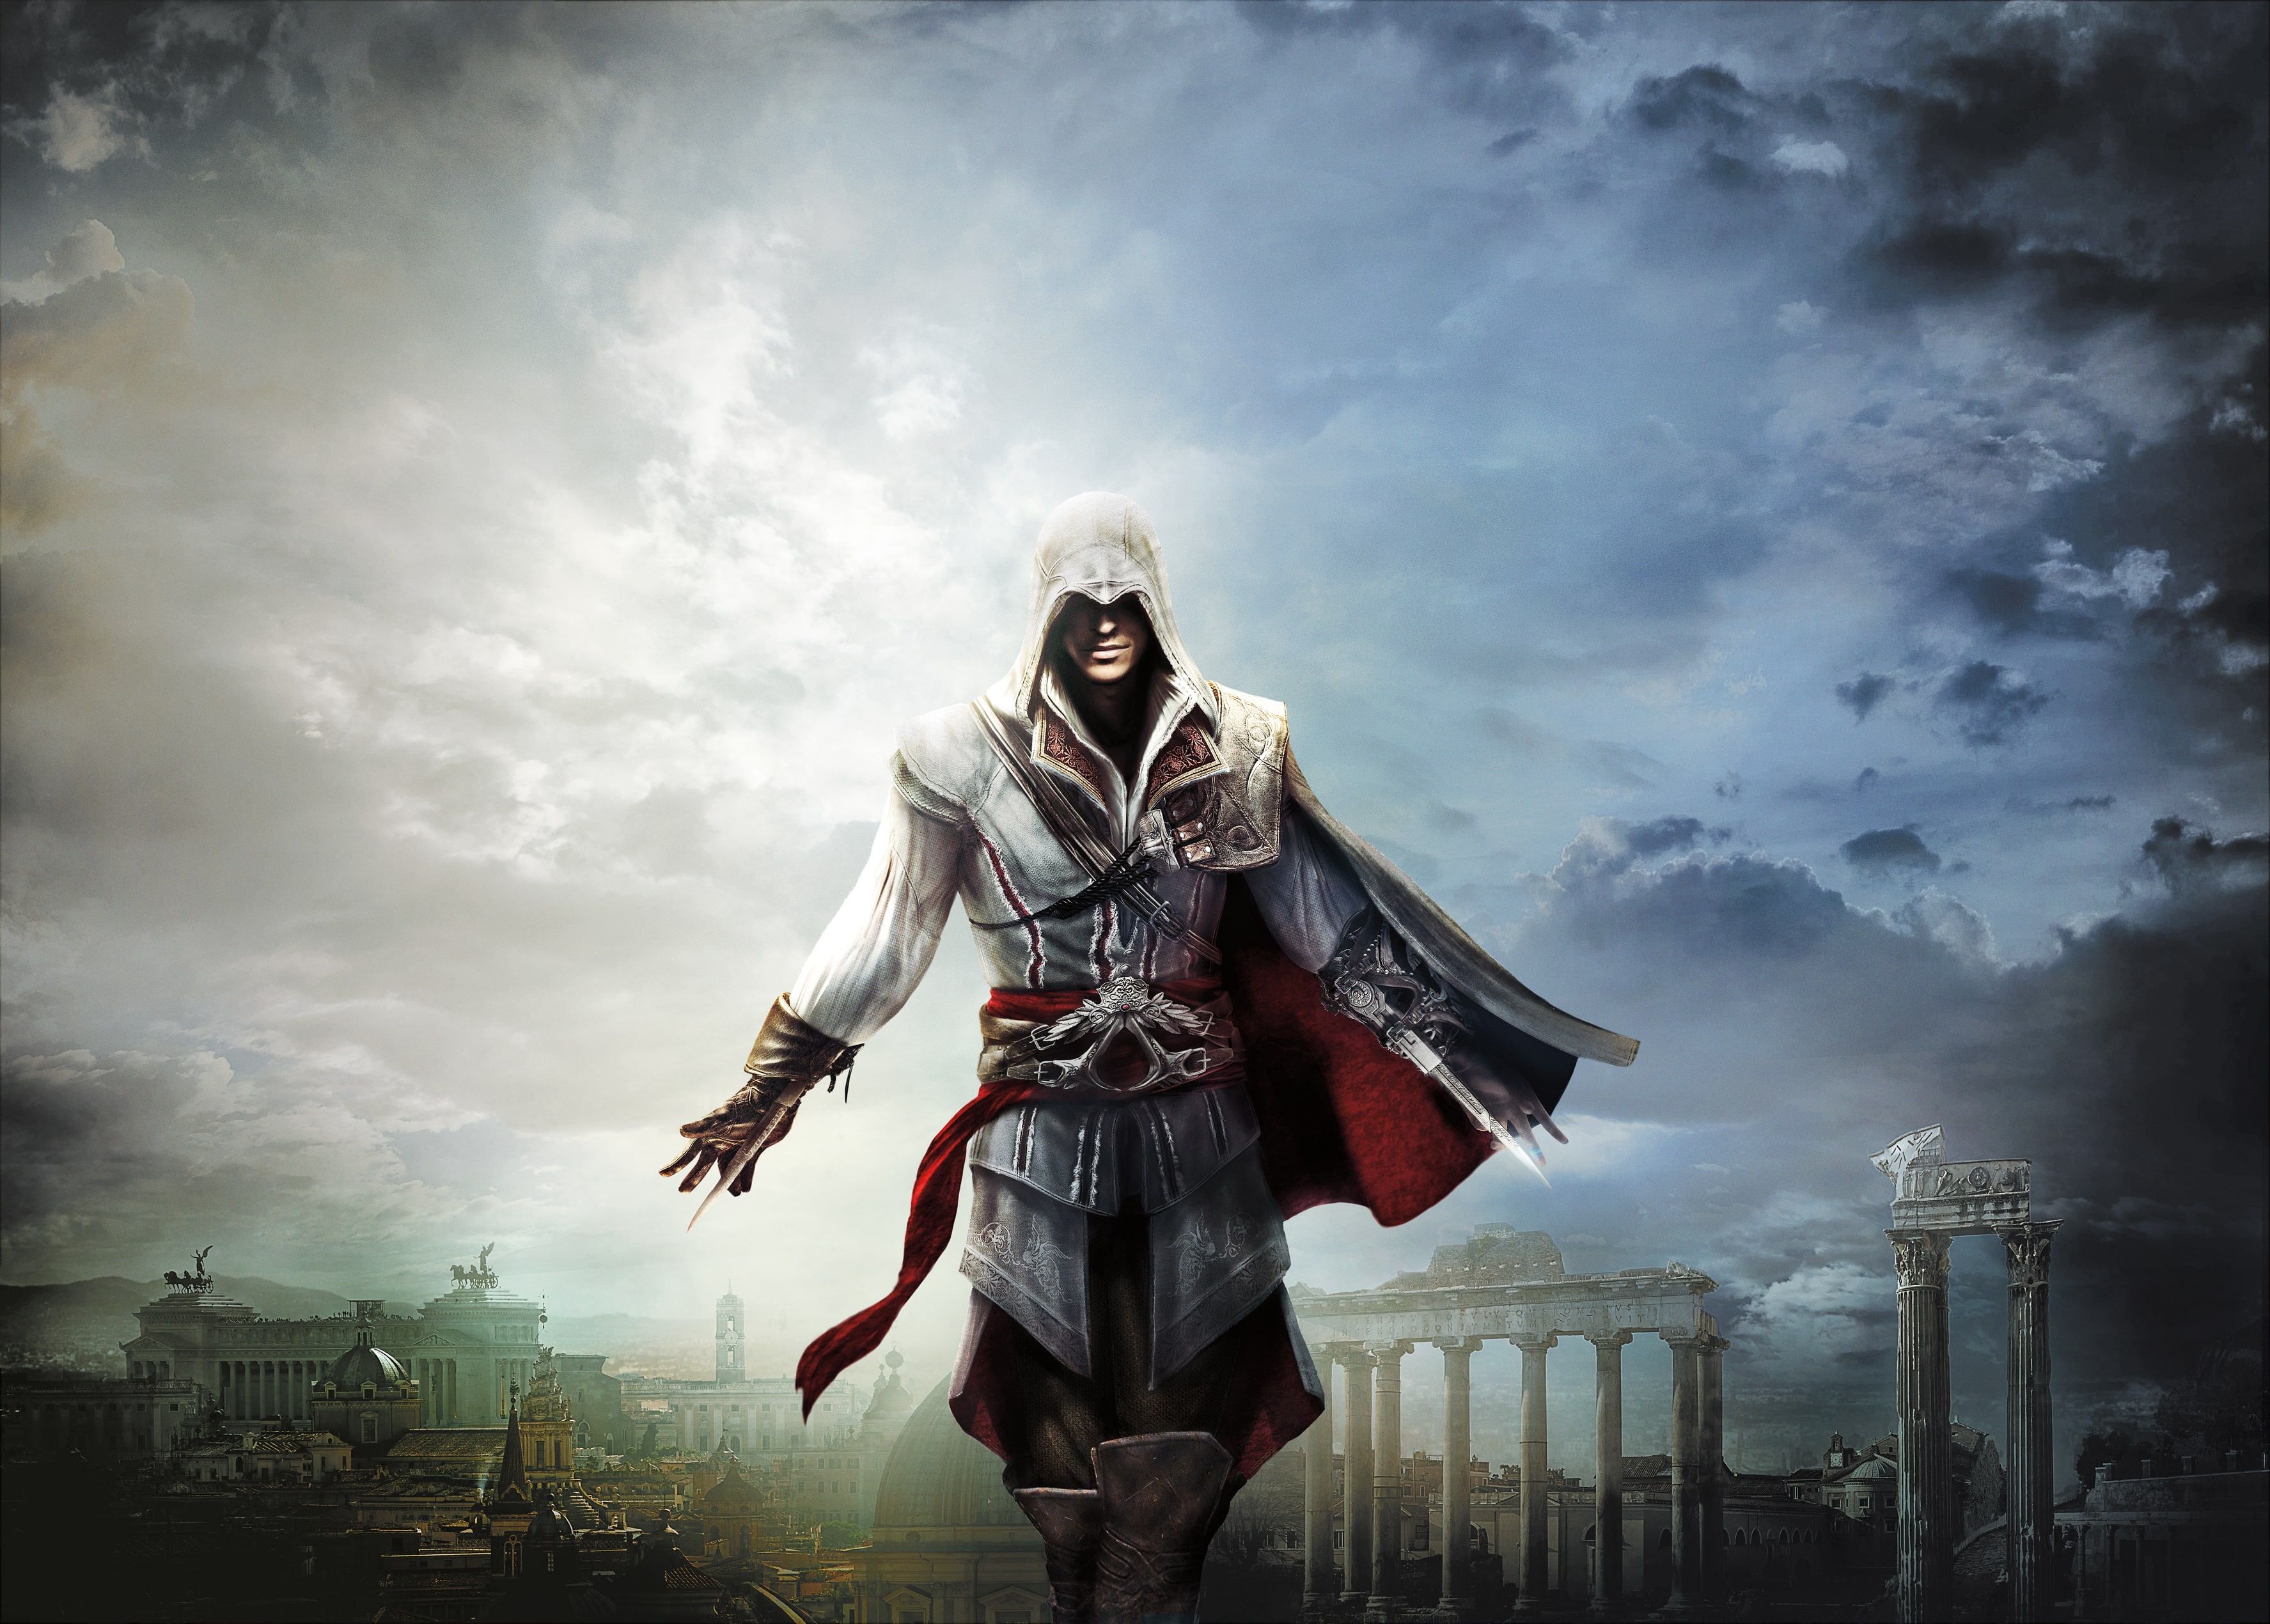 Comparativa gráfica entre Assassin’s Creed Brotherhood y Revelations